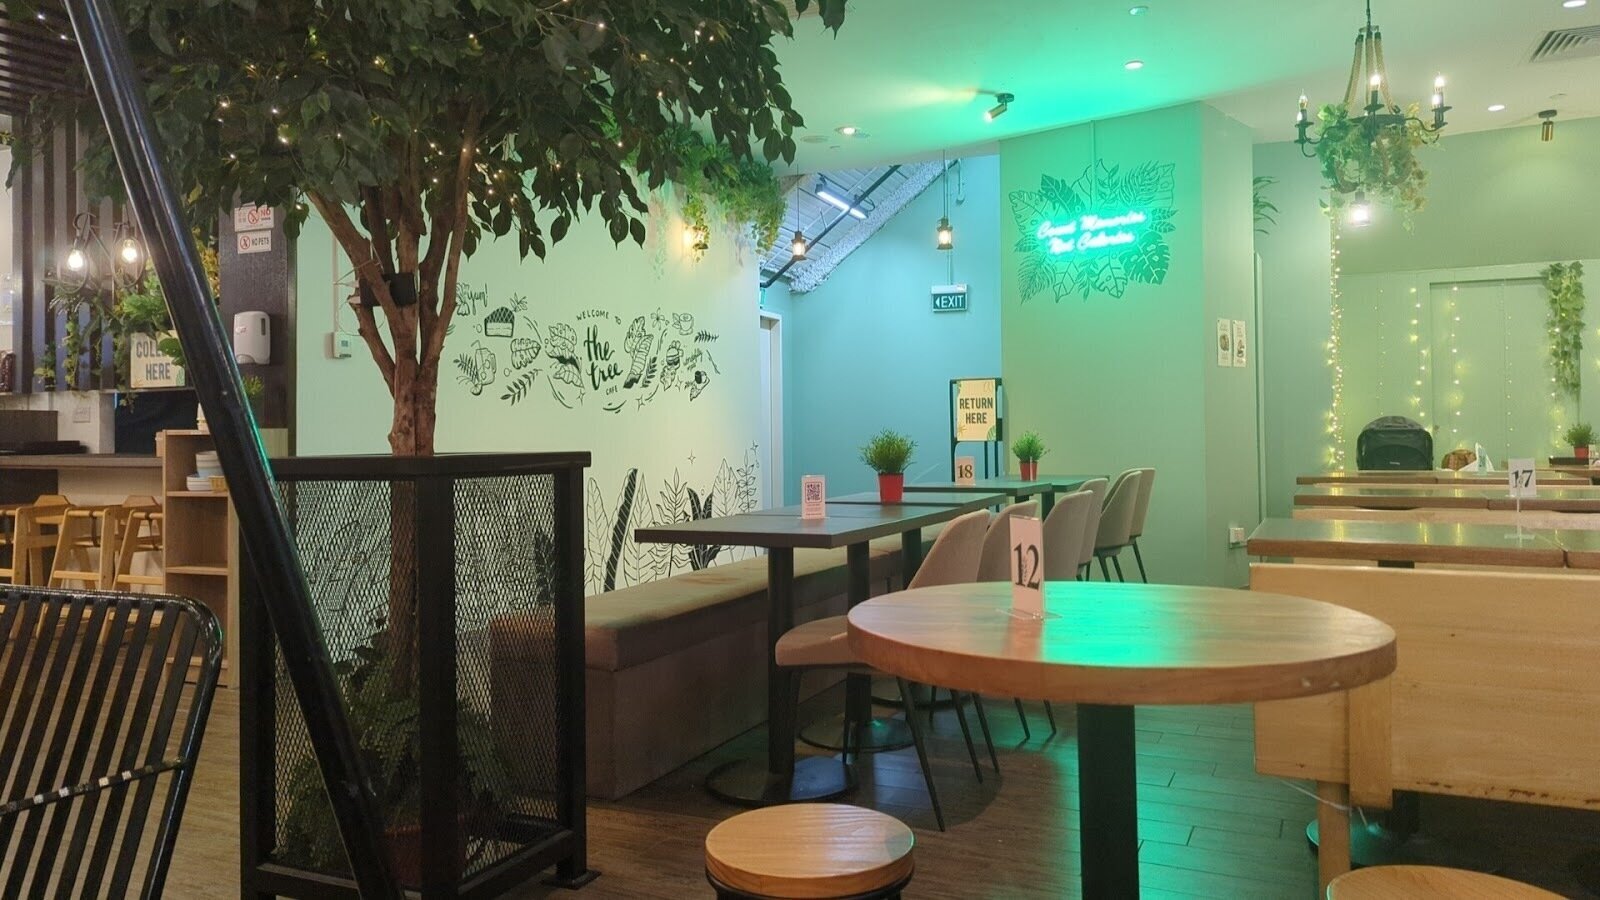 <span class="translation_missing" title="translation missing: en.meta.location_title, location_name: The Tree Cafe (Marina Square), city: Singapore">Location Title</span>